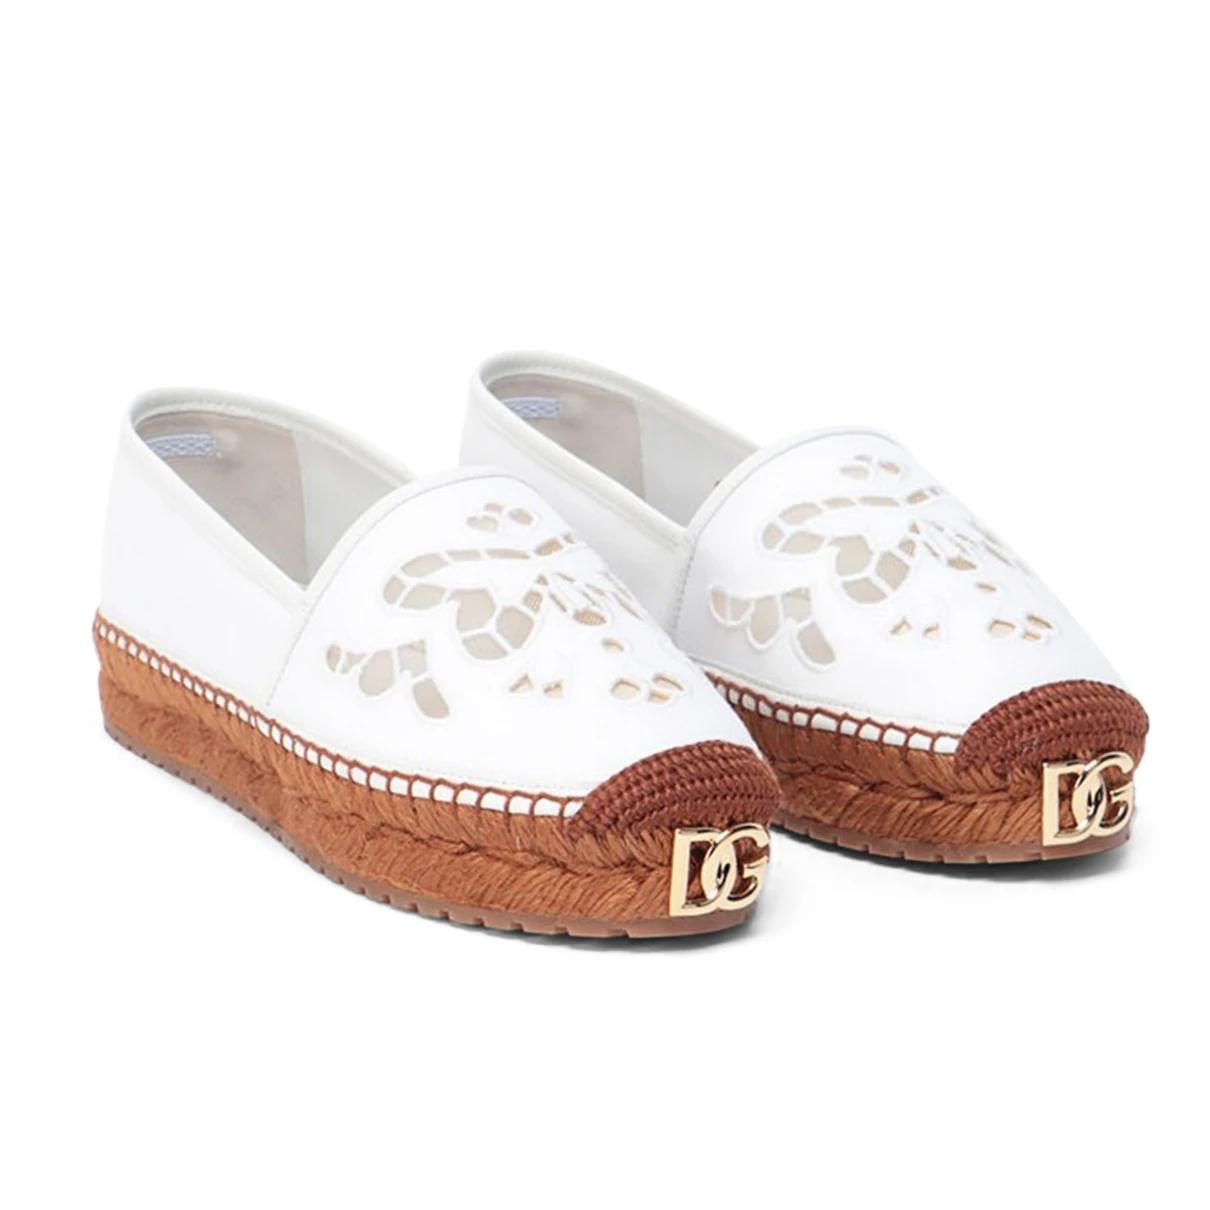 shoes D & G espadrilles for Female Rubber 38 EU. Used condition